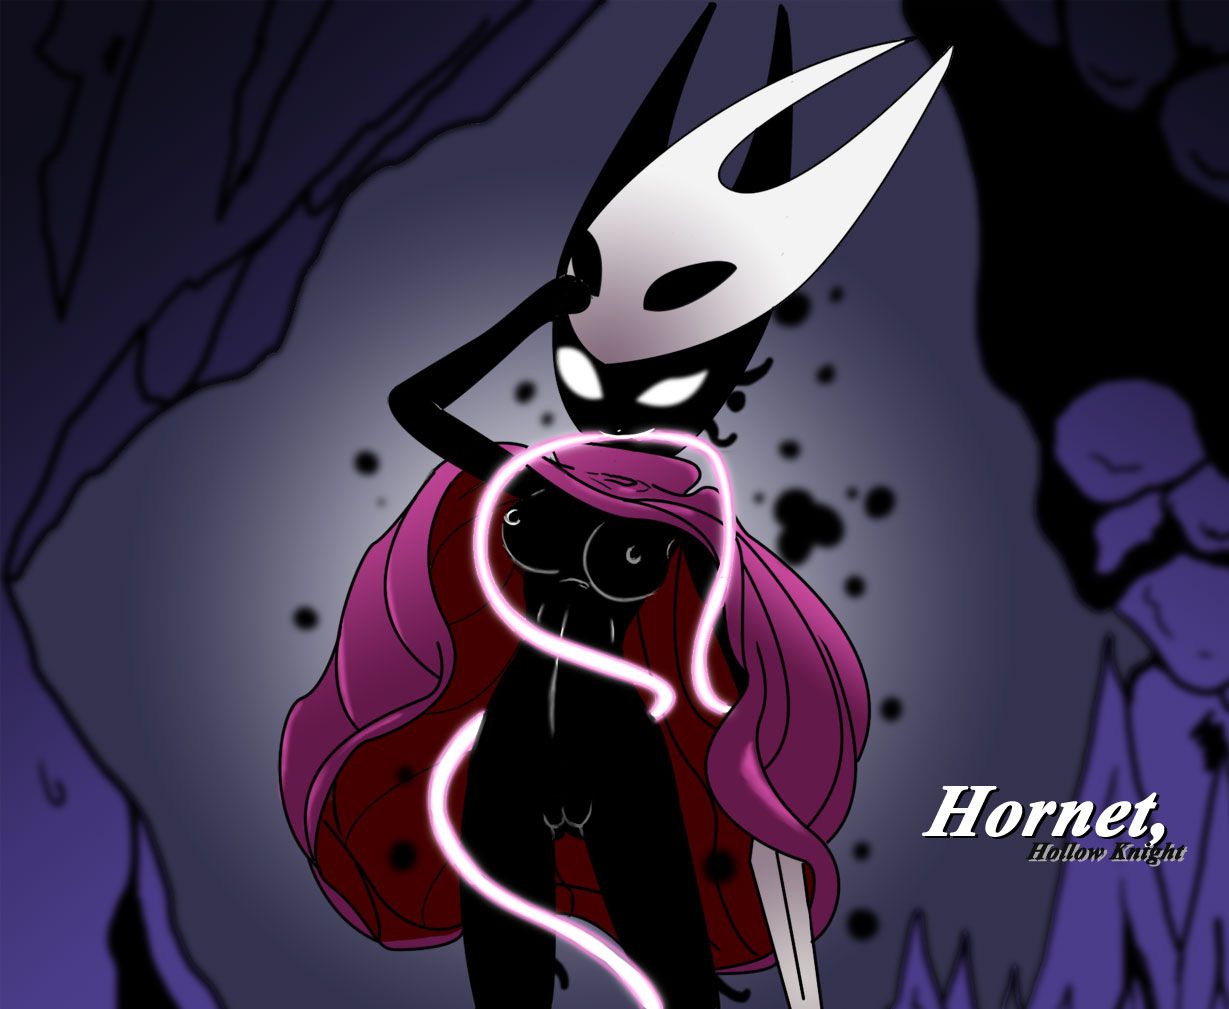 Hollow knight collection 126